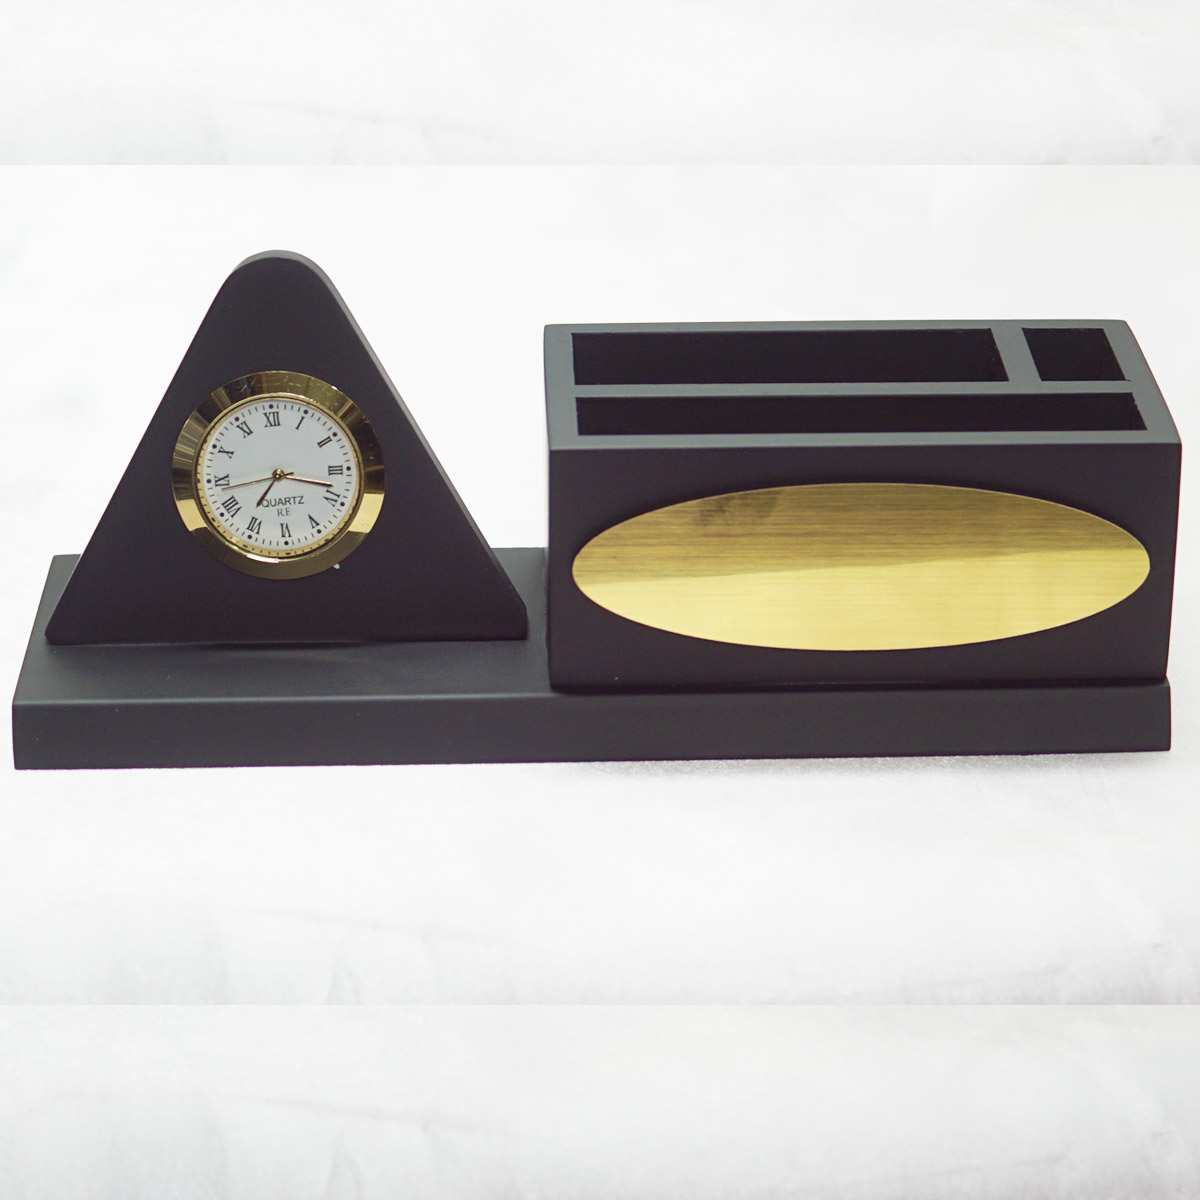 penhouse.in Customized Plastic Triangular Shape Design Pen Stand With Clock And Holder SKU 87168